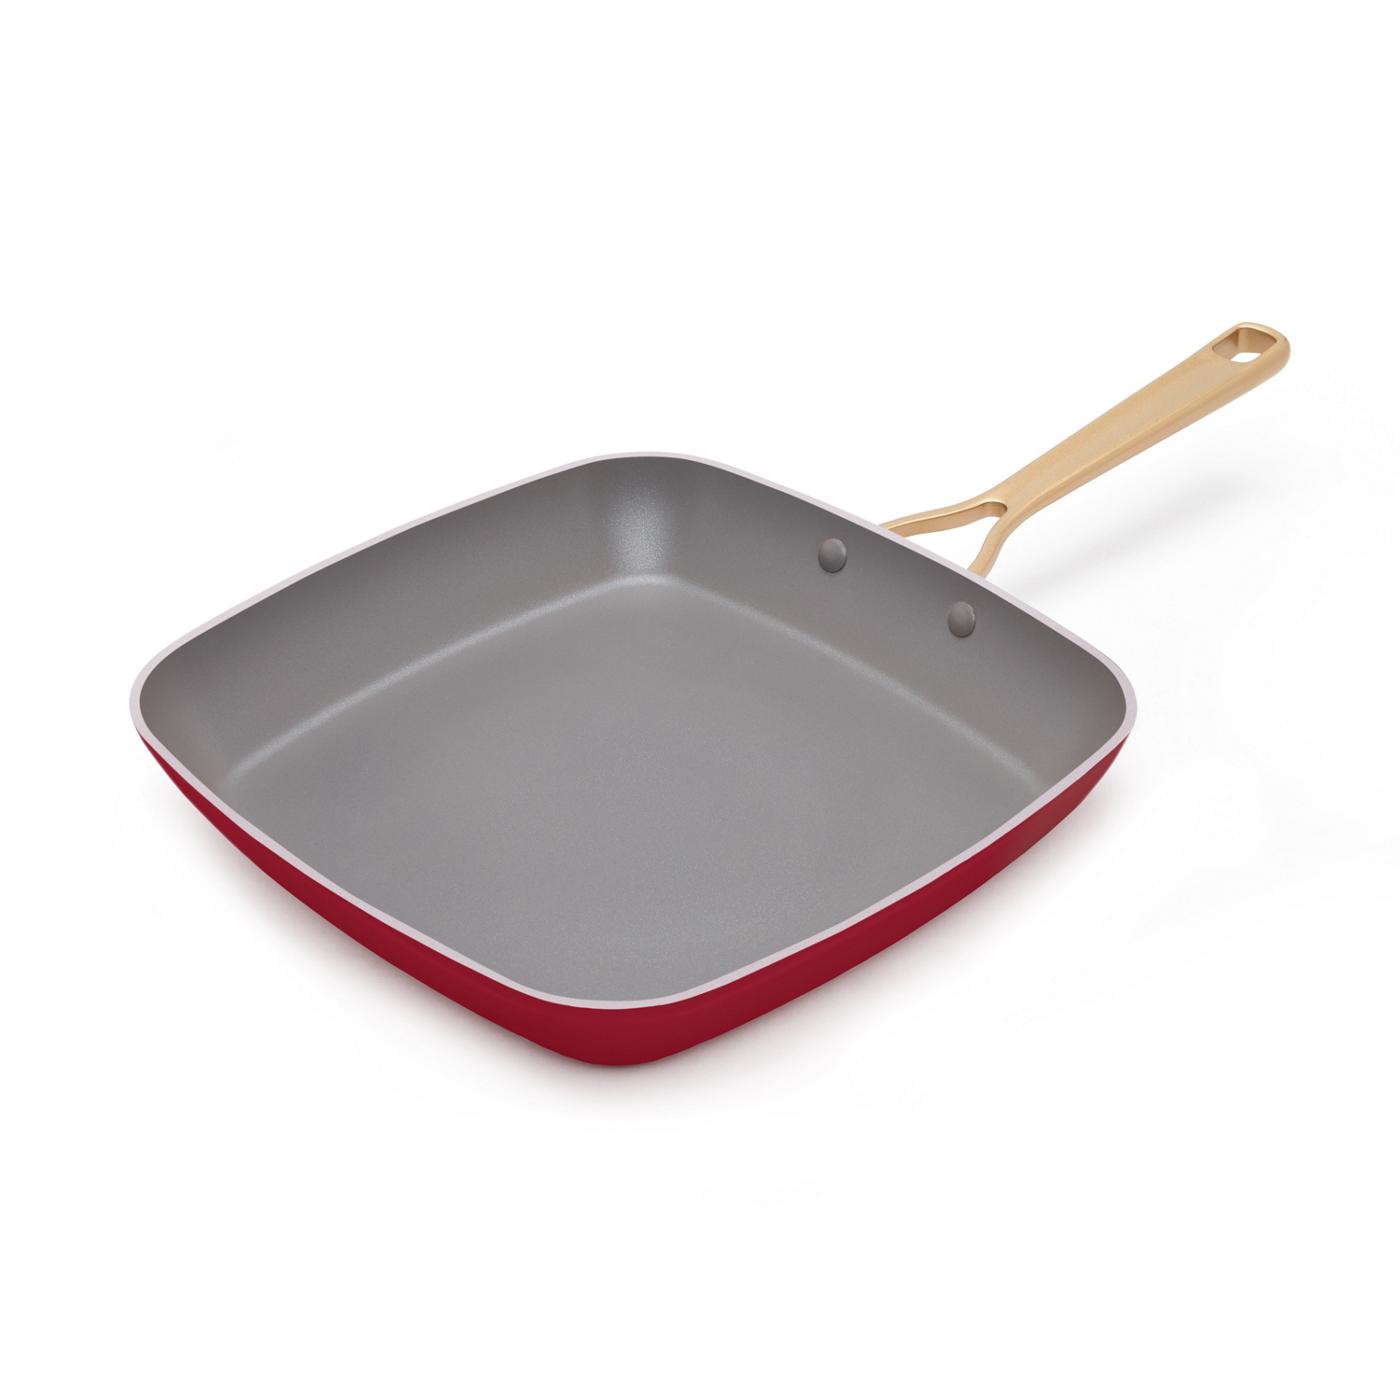 Kitchen & Table by H-E-B Non-Stick Square Griddle - Bordeaux Red; image 1 of 3